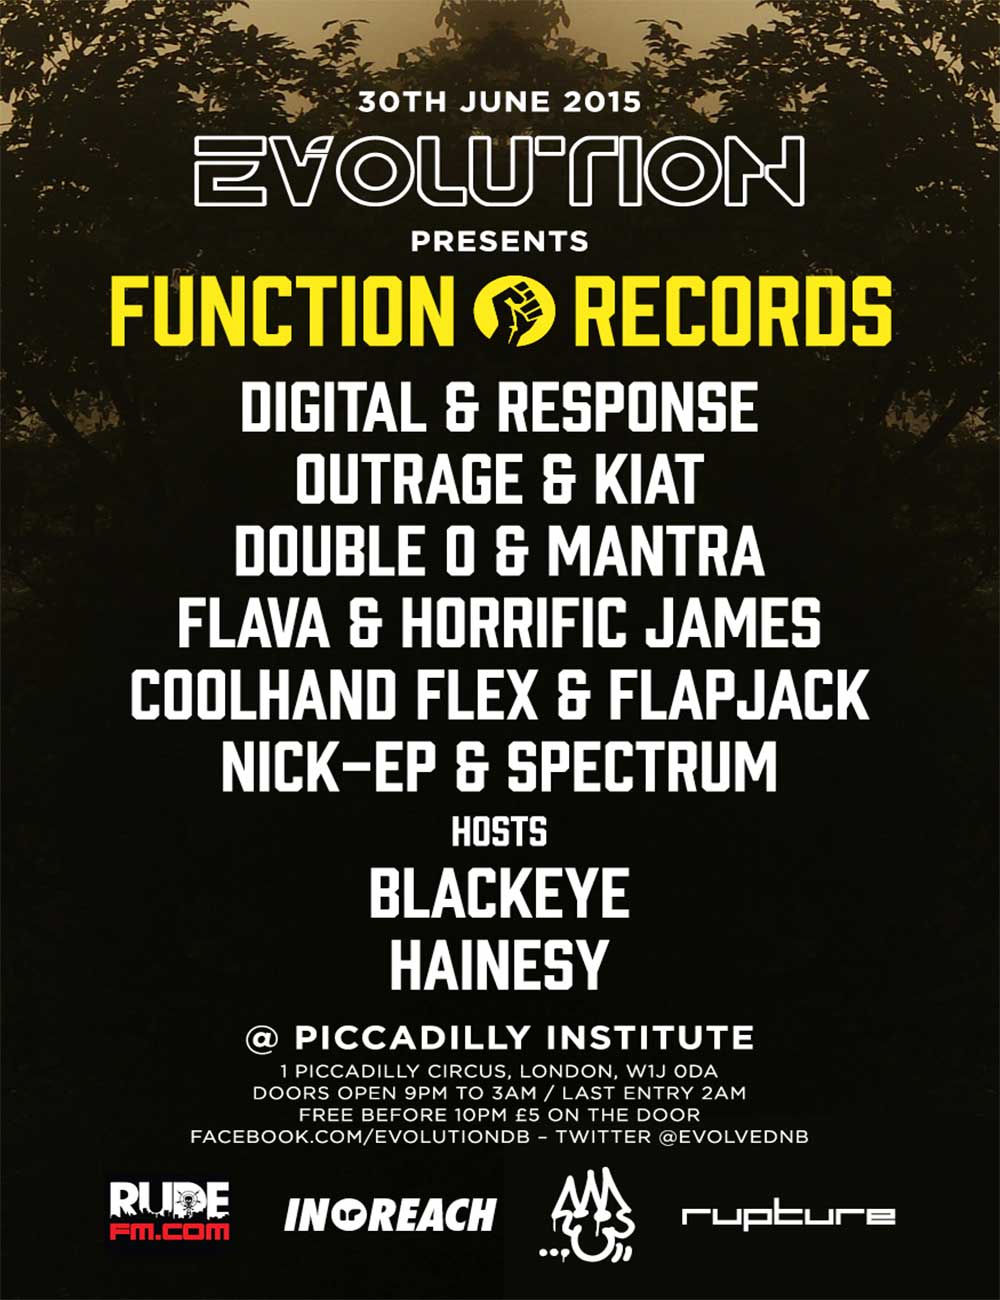  Function Records night - June 30th @ Evolution - Piccadilly Institute, 1 Piccadilly Circus, W1JODA